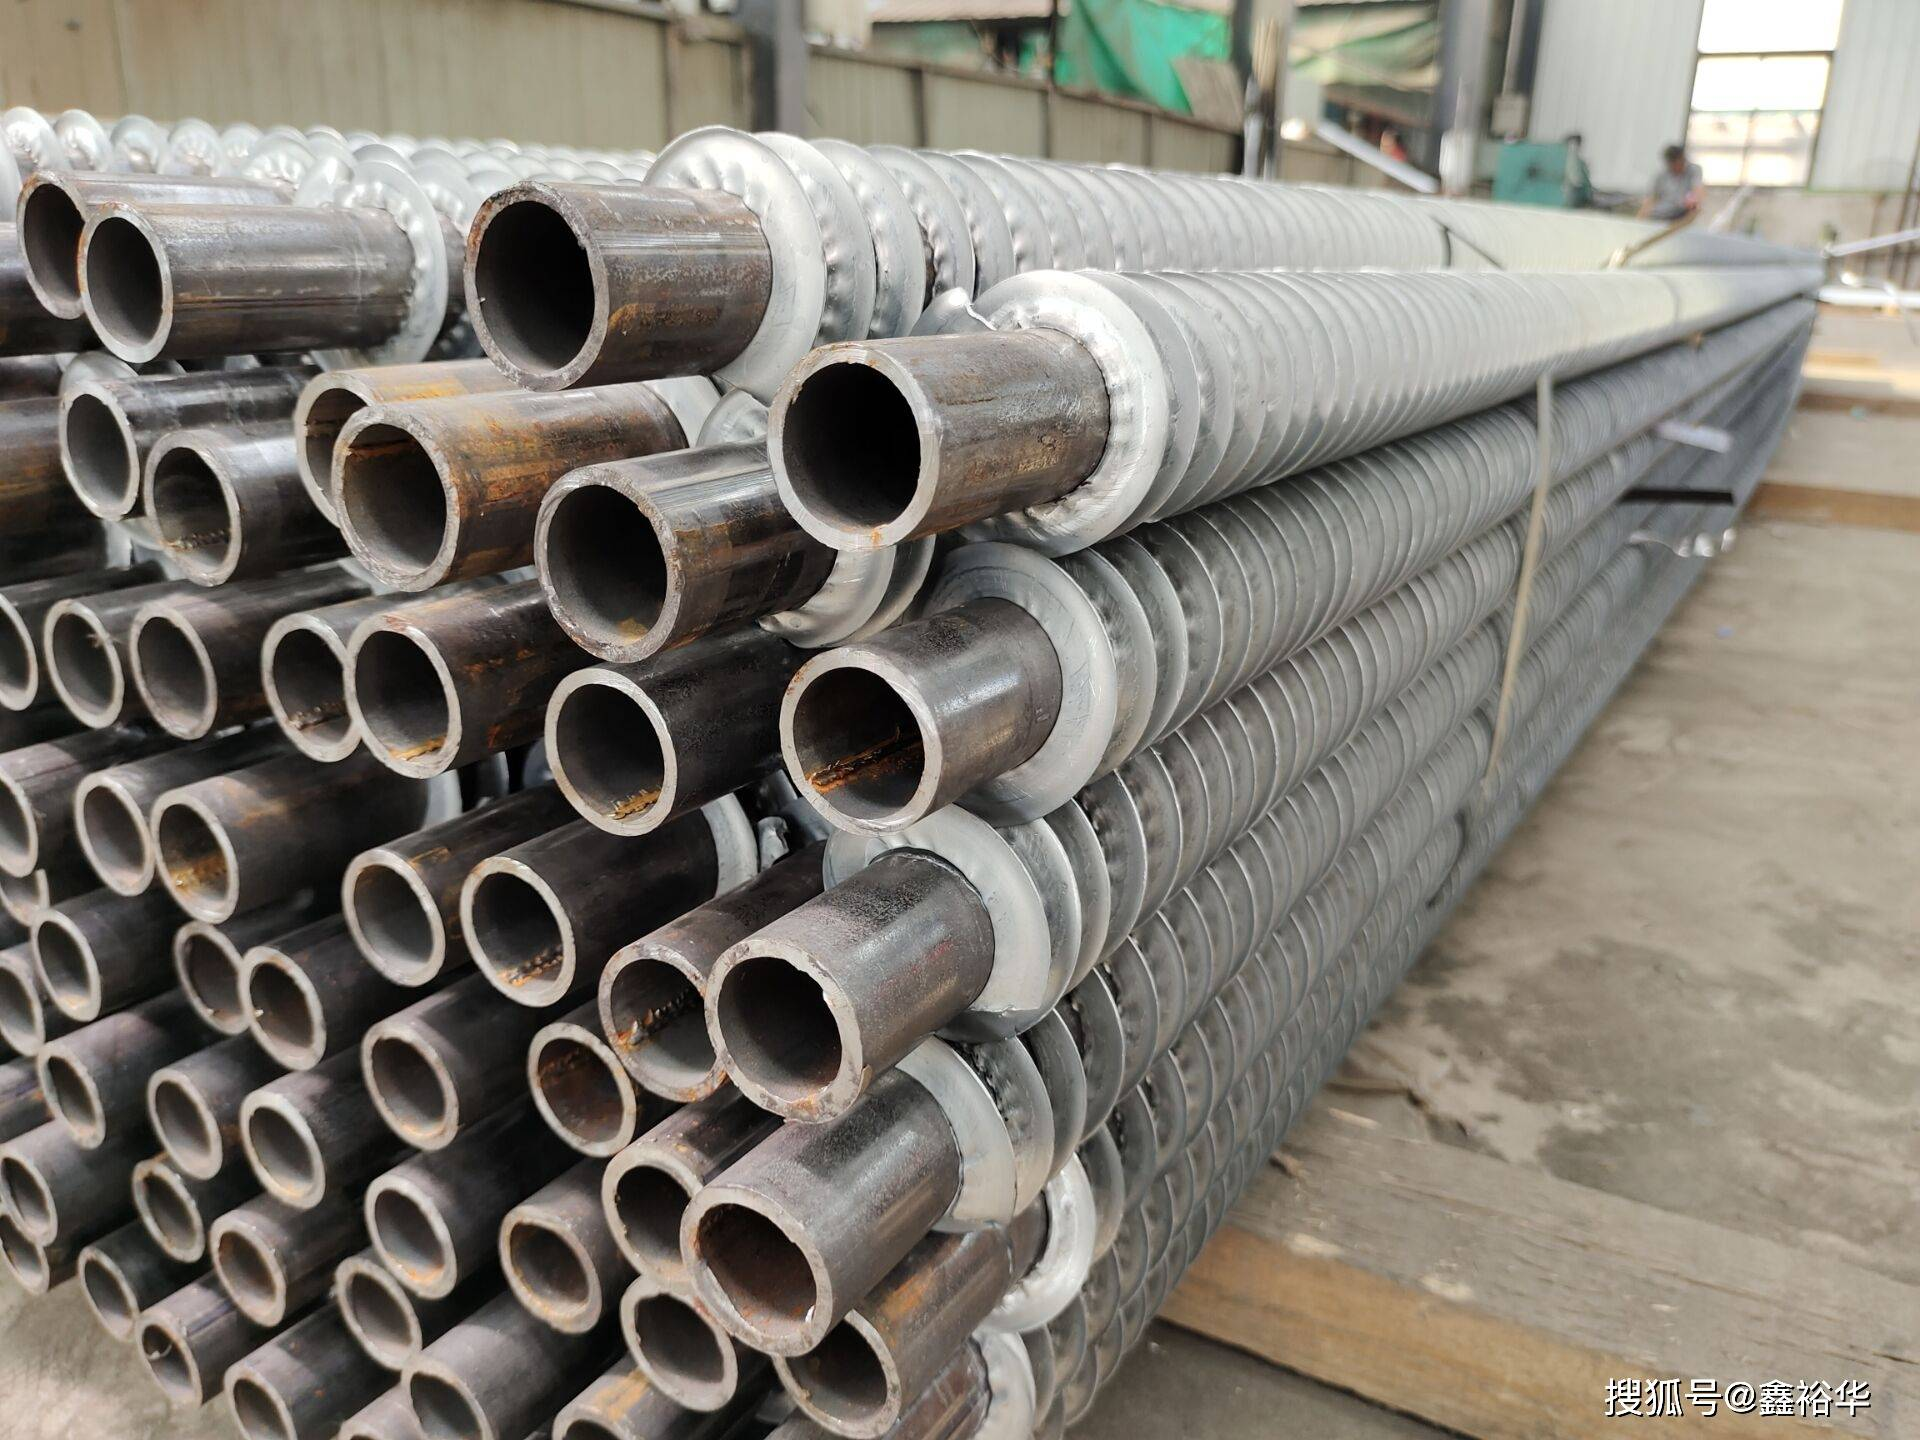 Domestic steel market prices fell